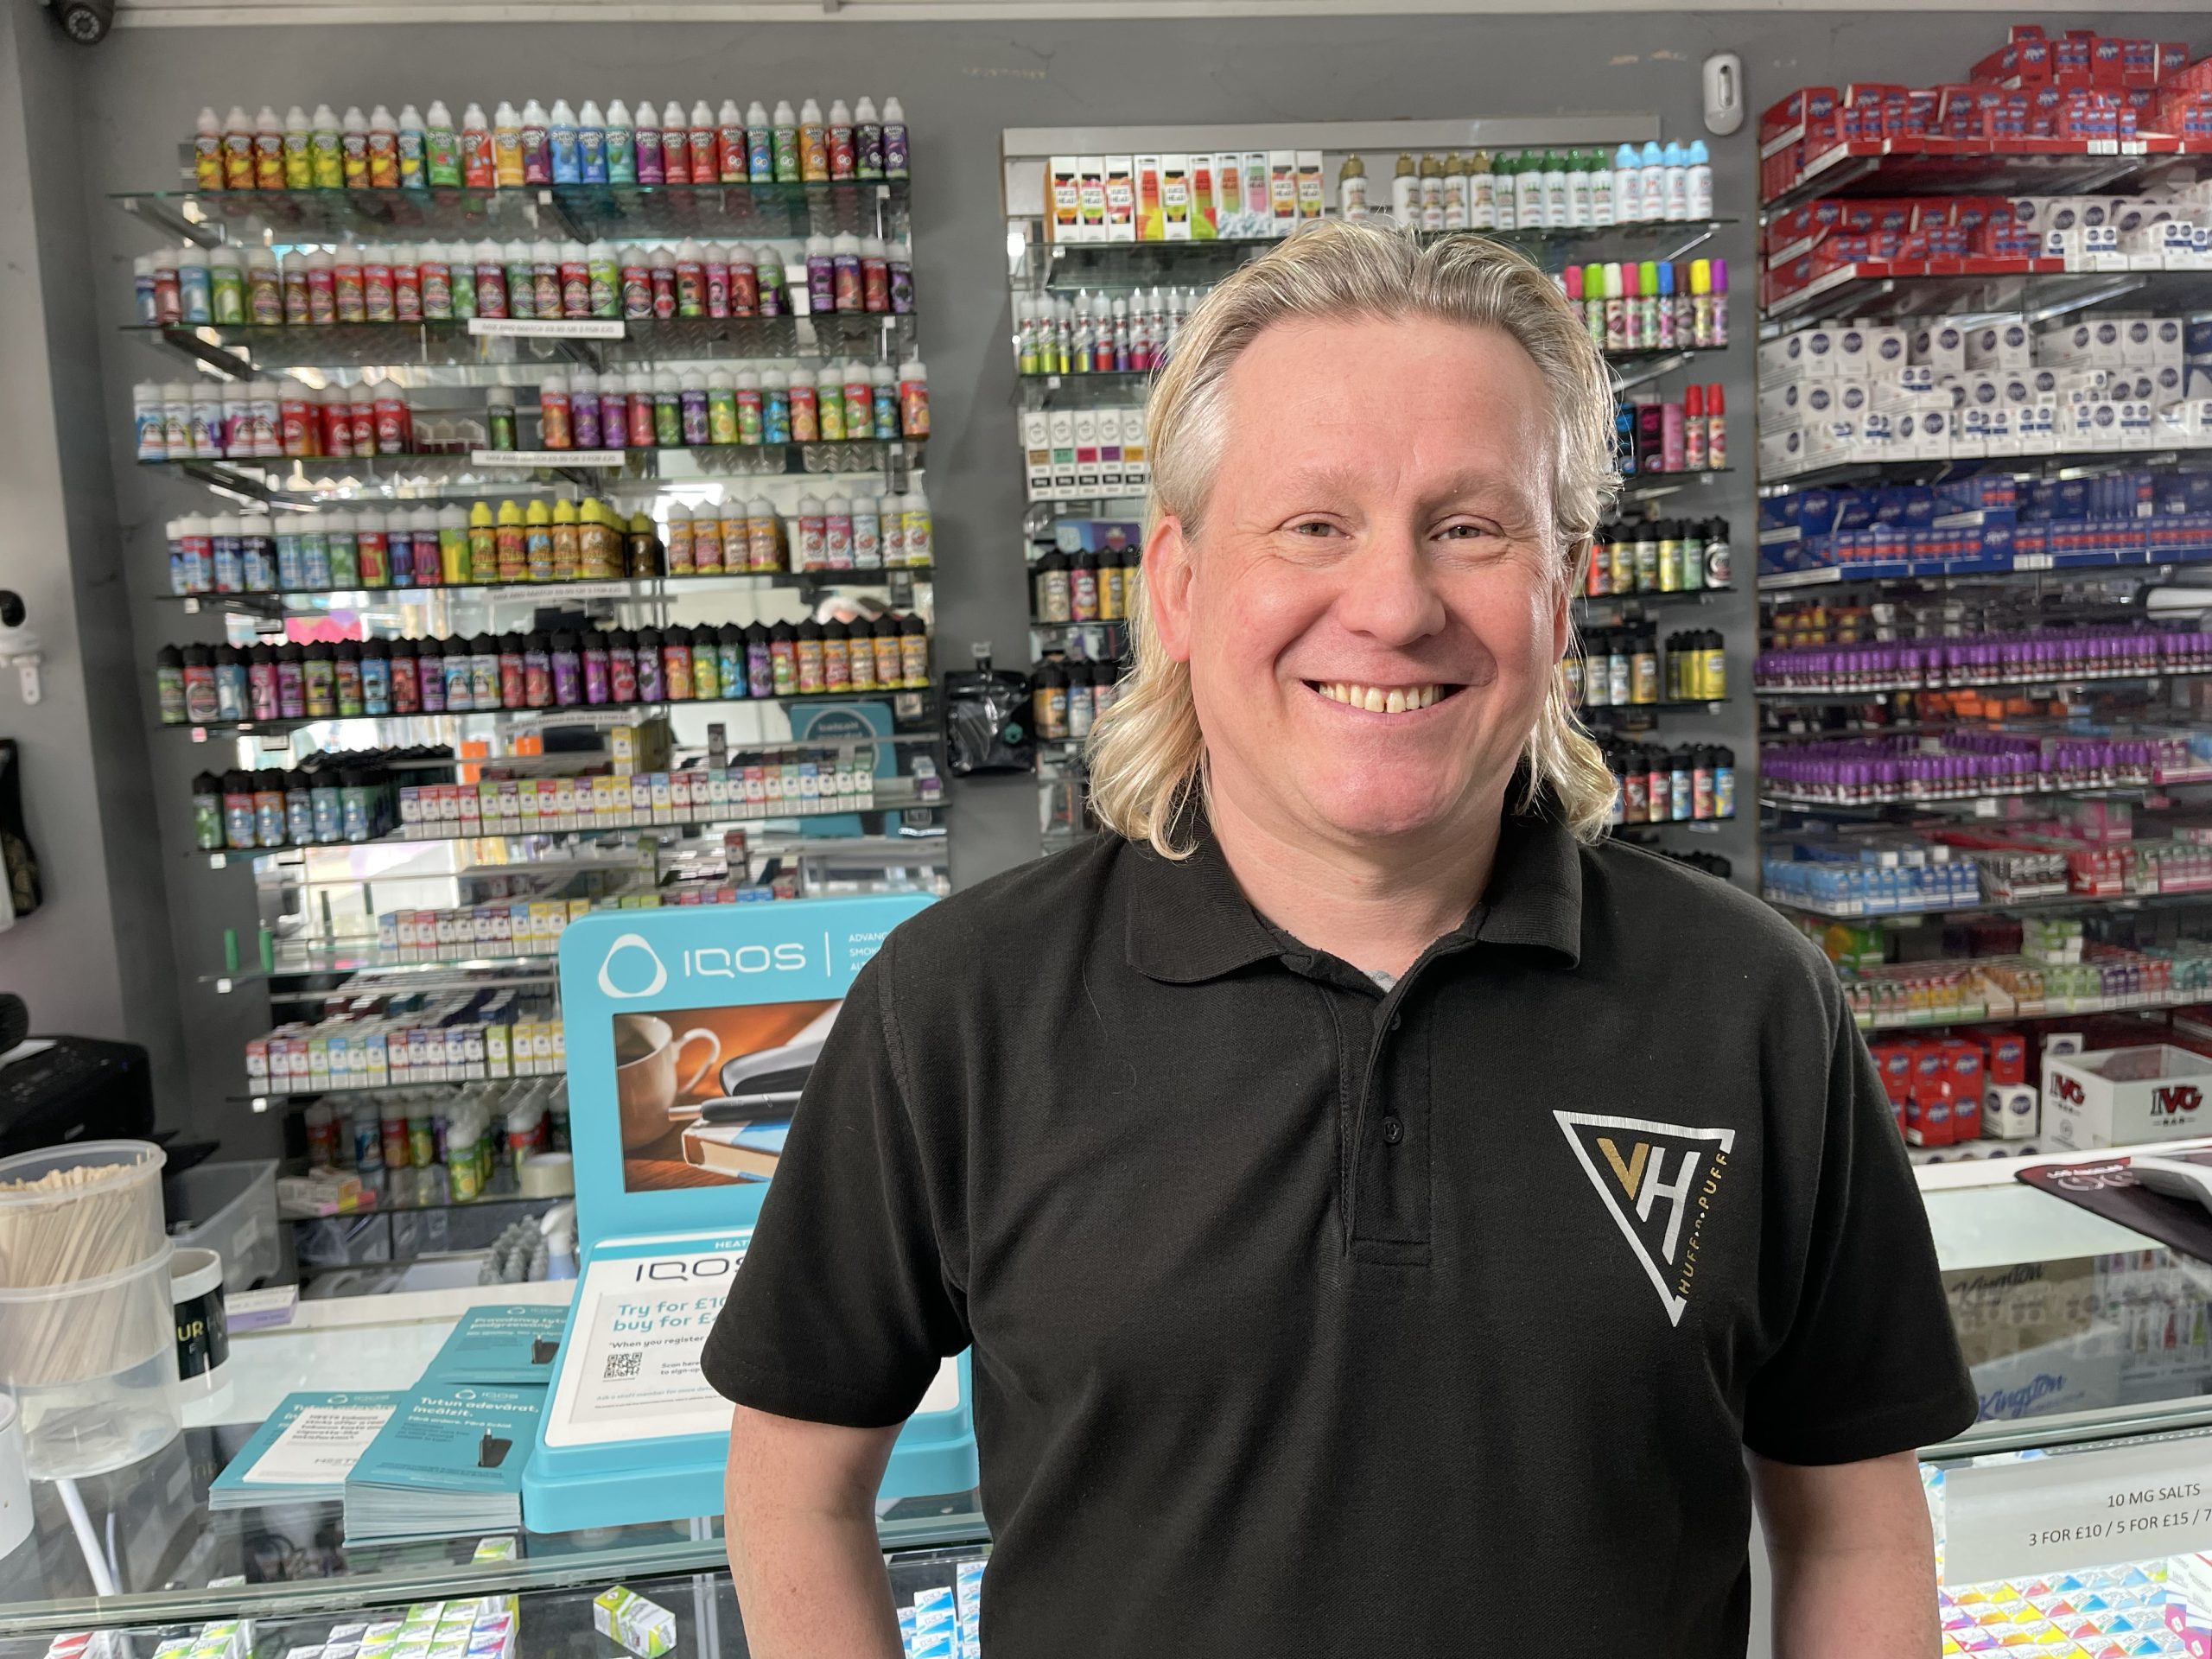 lee howard, store manager at the vapourhut limited, stood in his vape shop infront of shelves of e-liquids